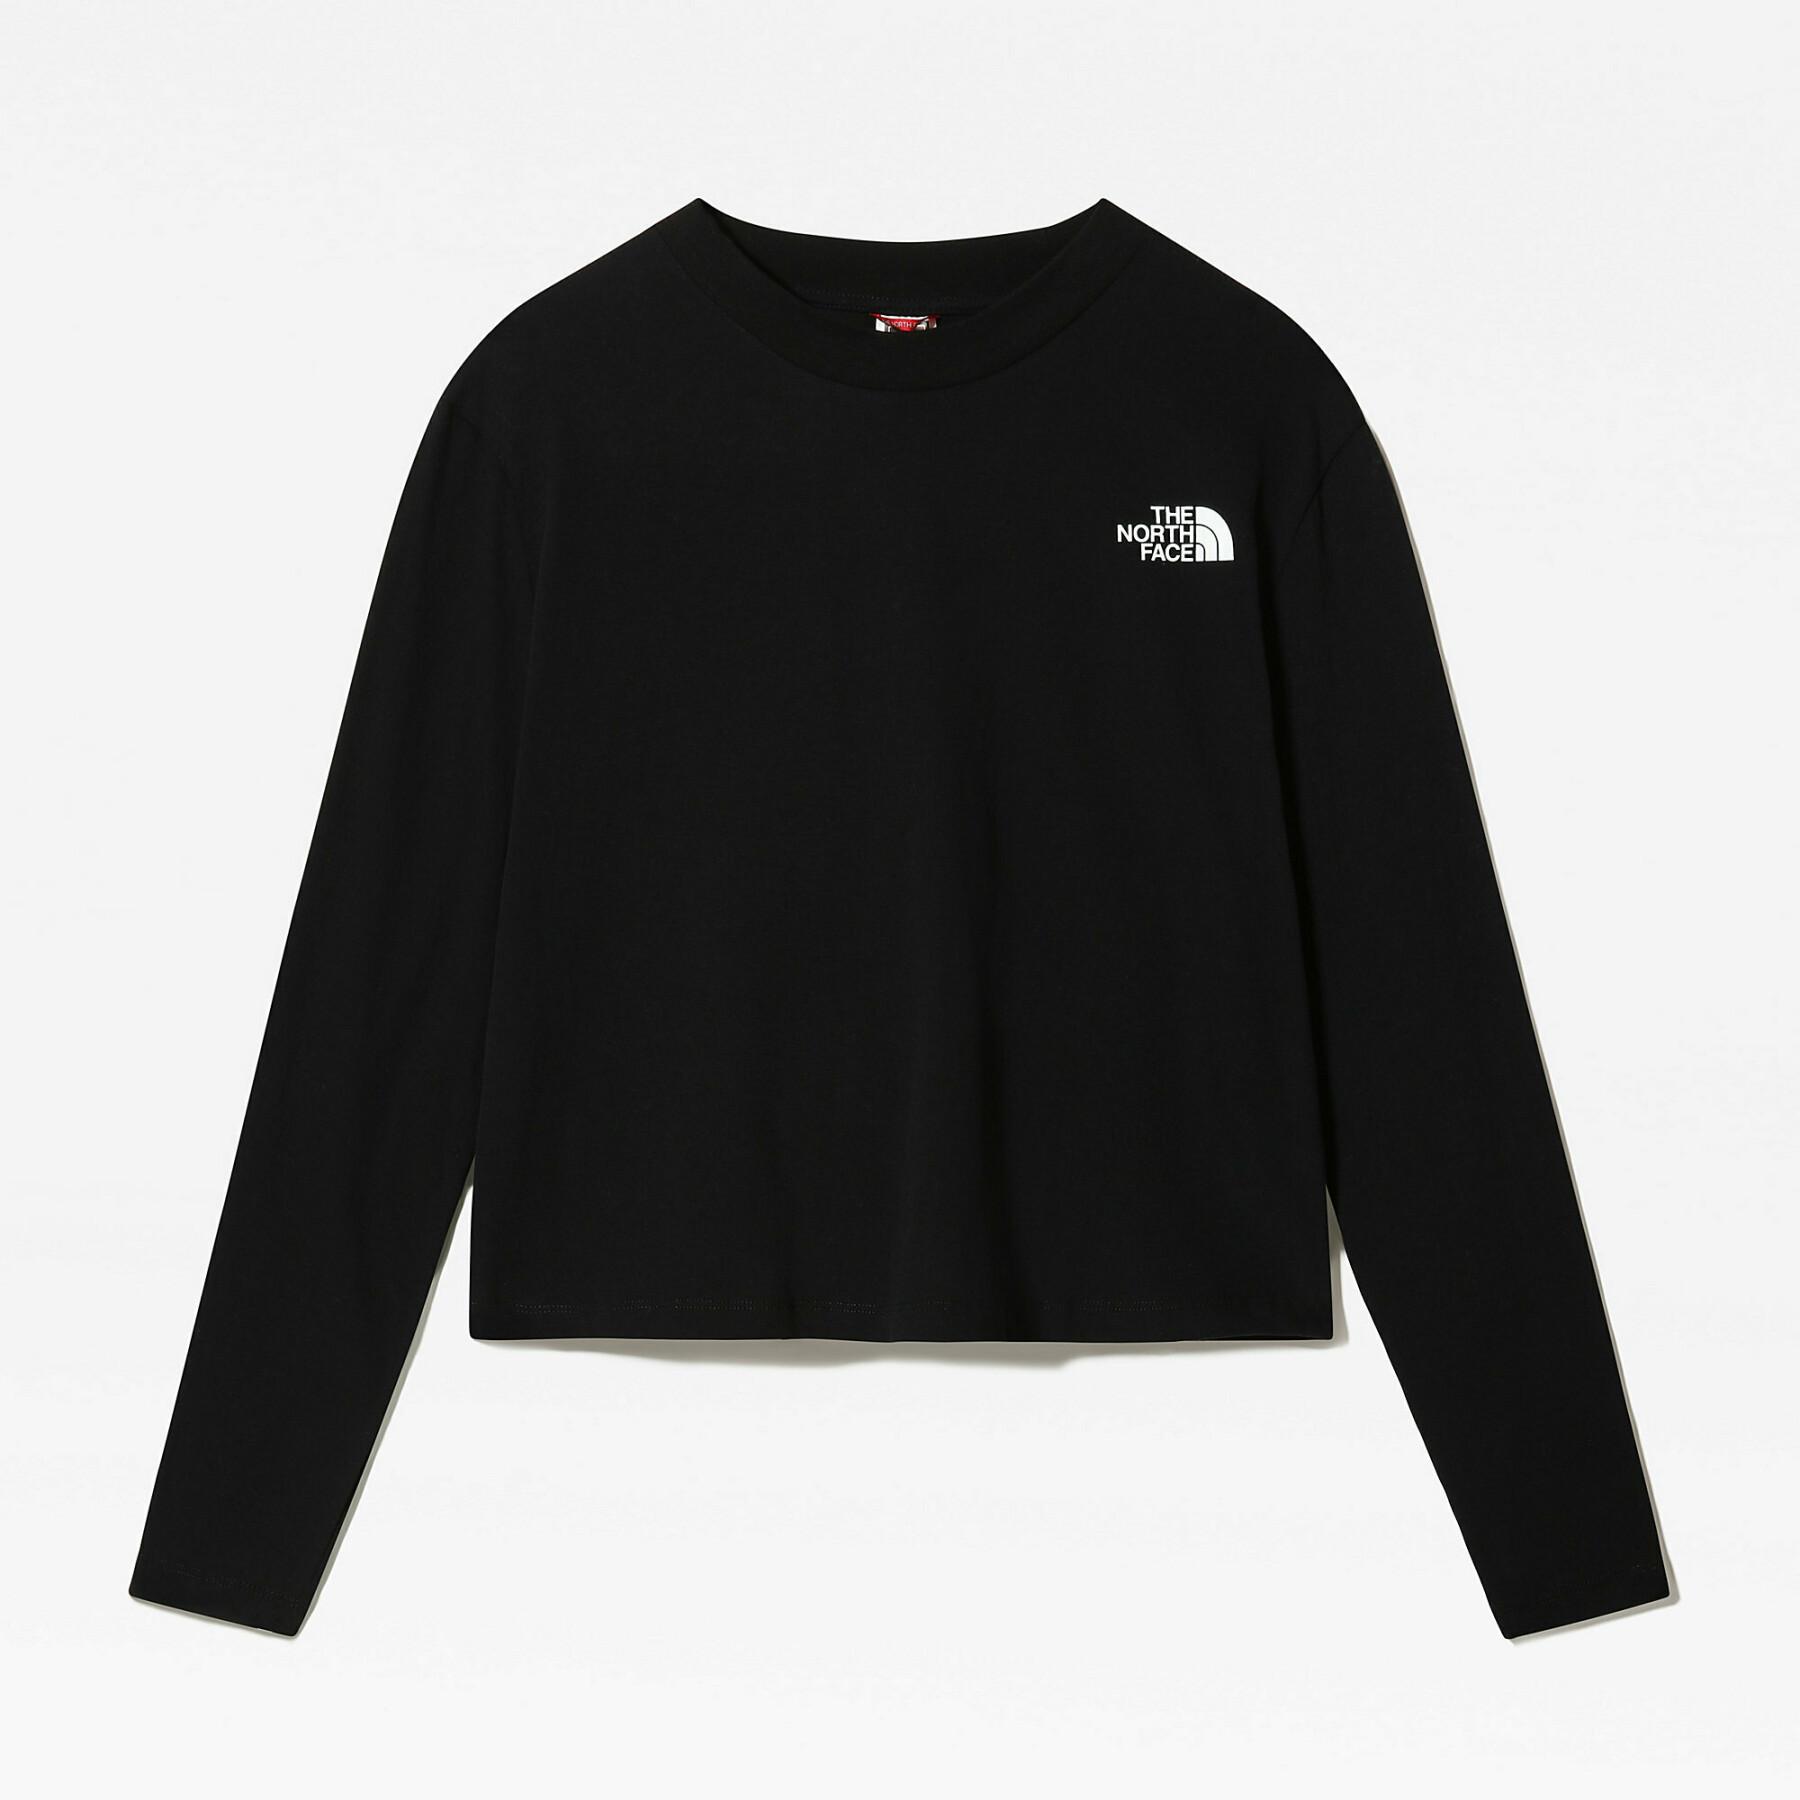 Women's long sleeve t-shirt The North Face